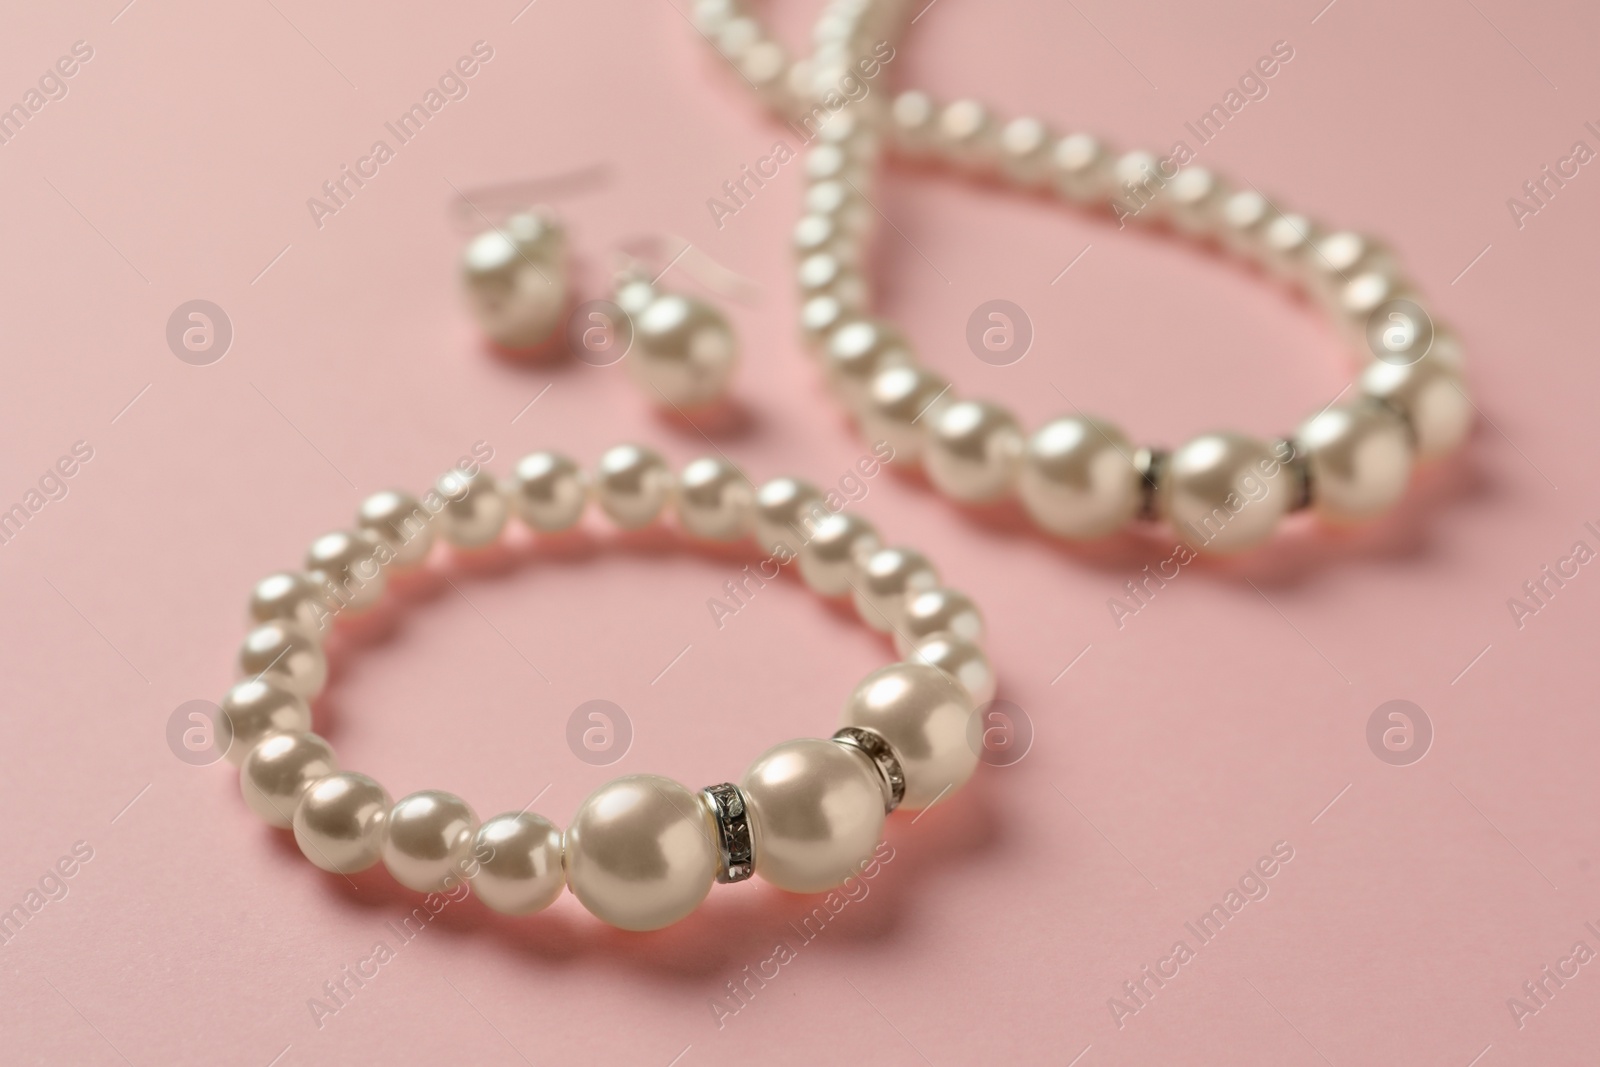 Photo of Elegant necklace, bracelet and earrings with pearls on pink background, closeup